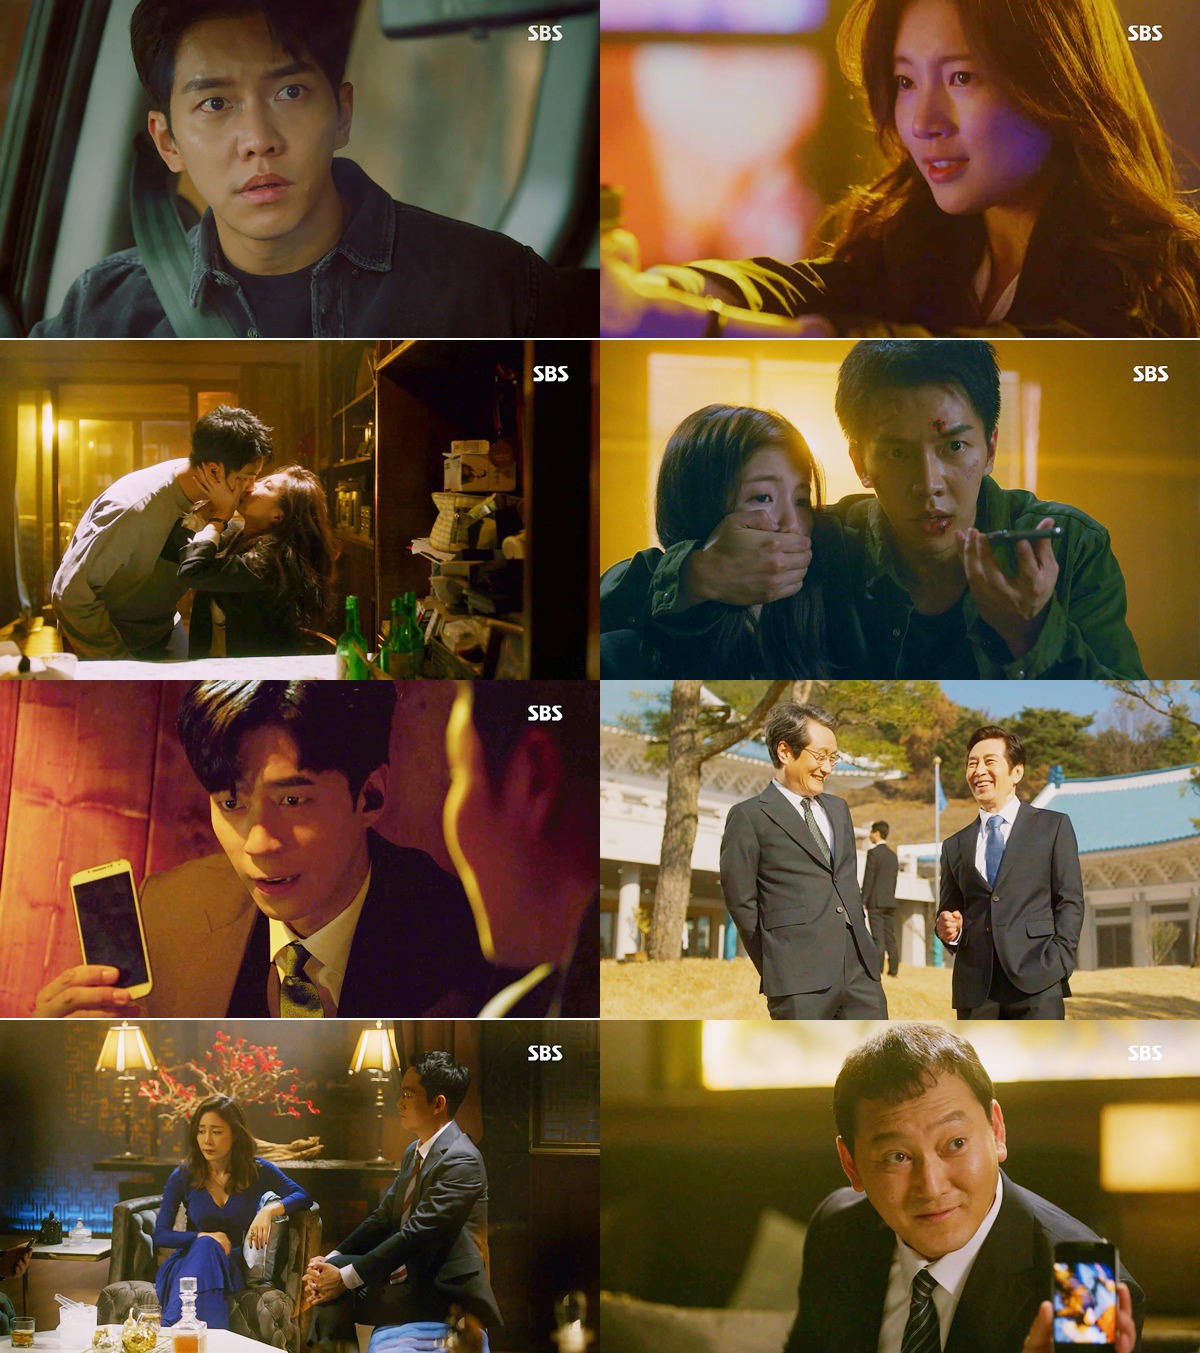 Seoul = = Vagabond Lee Seung-gi and Bae Suzy passed the death penalty and kissed drunk.According to Nielsen Korea, a ratings agency on the 6th, SBS gilt drama Vagabond (playplayplay by Jang Young-chul, Jung Kyung-soon/directed by Yoo In-sik) was 7.2% in the first part, 10% in the second part, and 11.3% in the third part (based on the national level).In particular, Lee Seung-gi and Bae Suzy have remained in the top spot in the same time zone with a 13.2% audience rating (based on the metropolitan area) as the story of kissing after passing the death penalty.The 2049 audience rating was 3.5%, 5.0% and 6.1%, respectively.On the day of the show, Cha Dal-gun (Lee Seung-gi), who moved to a safe house in NIS, started with a welcome welcome to the appearance of Goharry (Bae Suzy).But for a while, he was able to save his life thanks to Harrys base after a breathtaking battle with one of the Irreplaceable You Sales from the North Korean Special Agents who disguised himself as a Chinese employee.After a while, they found out that Min Jae-sik (Jung Man-sik) was the one who had been on the mission of murdering Irreplaceable Yousal, and Harry was shocked.But to avoid doubt, he also demonstrated a base that sent false photos of Dalgan being removed.In the meantime, taewoong deliberately released her while investigating Sangmi, and soon she checked her phone call with Kim Woo-ki (Jang Hyuk-jin) at a cathedral and secured a smoking gun and caught her again.However, while moving to a car, the taewoong was hit by a car accident on the wind where the questionable truck hit.At that time Harry went to the restaurant and pointed at the gun, but quickly missed the wind where he ran away.After that, she went to Dalgans house after visiting the hospital of taewoong, and drank with him and talked about it and took it.Especially, she surprised him by kissing Dalgan with the words Lets do mine.Meanwhile, Vagabond is a drama that uncovers a huge national corruption found by a man involved in a civil-commodity passenger plane crash in a concealed truth, aiming for an intelligence action melodrama in which dangerous and naked adventures of family members, even the lost name of Vagabond unfold.Every Friday, Saturday, 10 p.m.